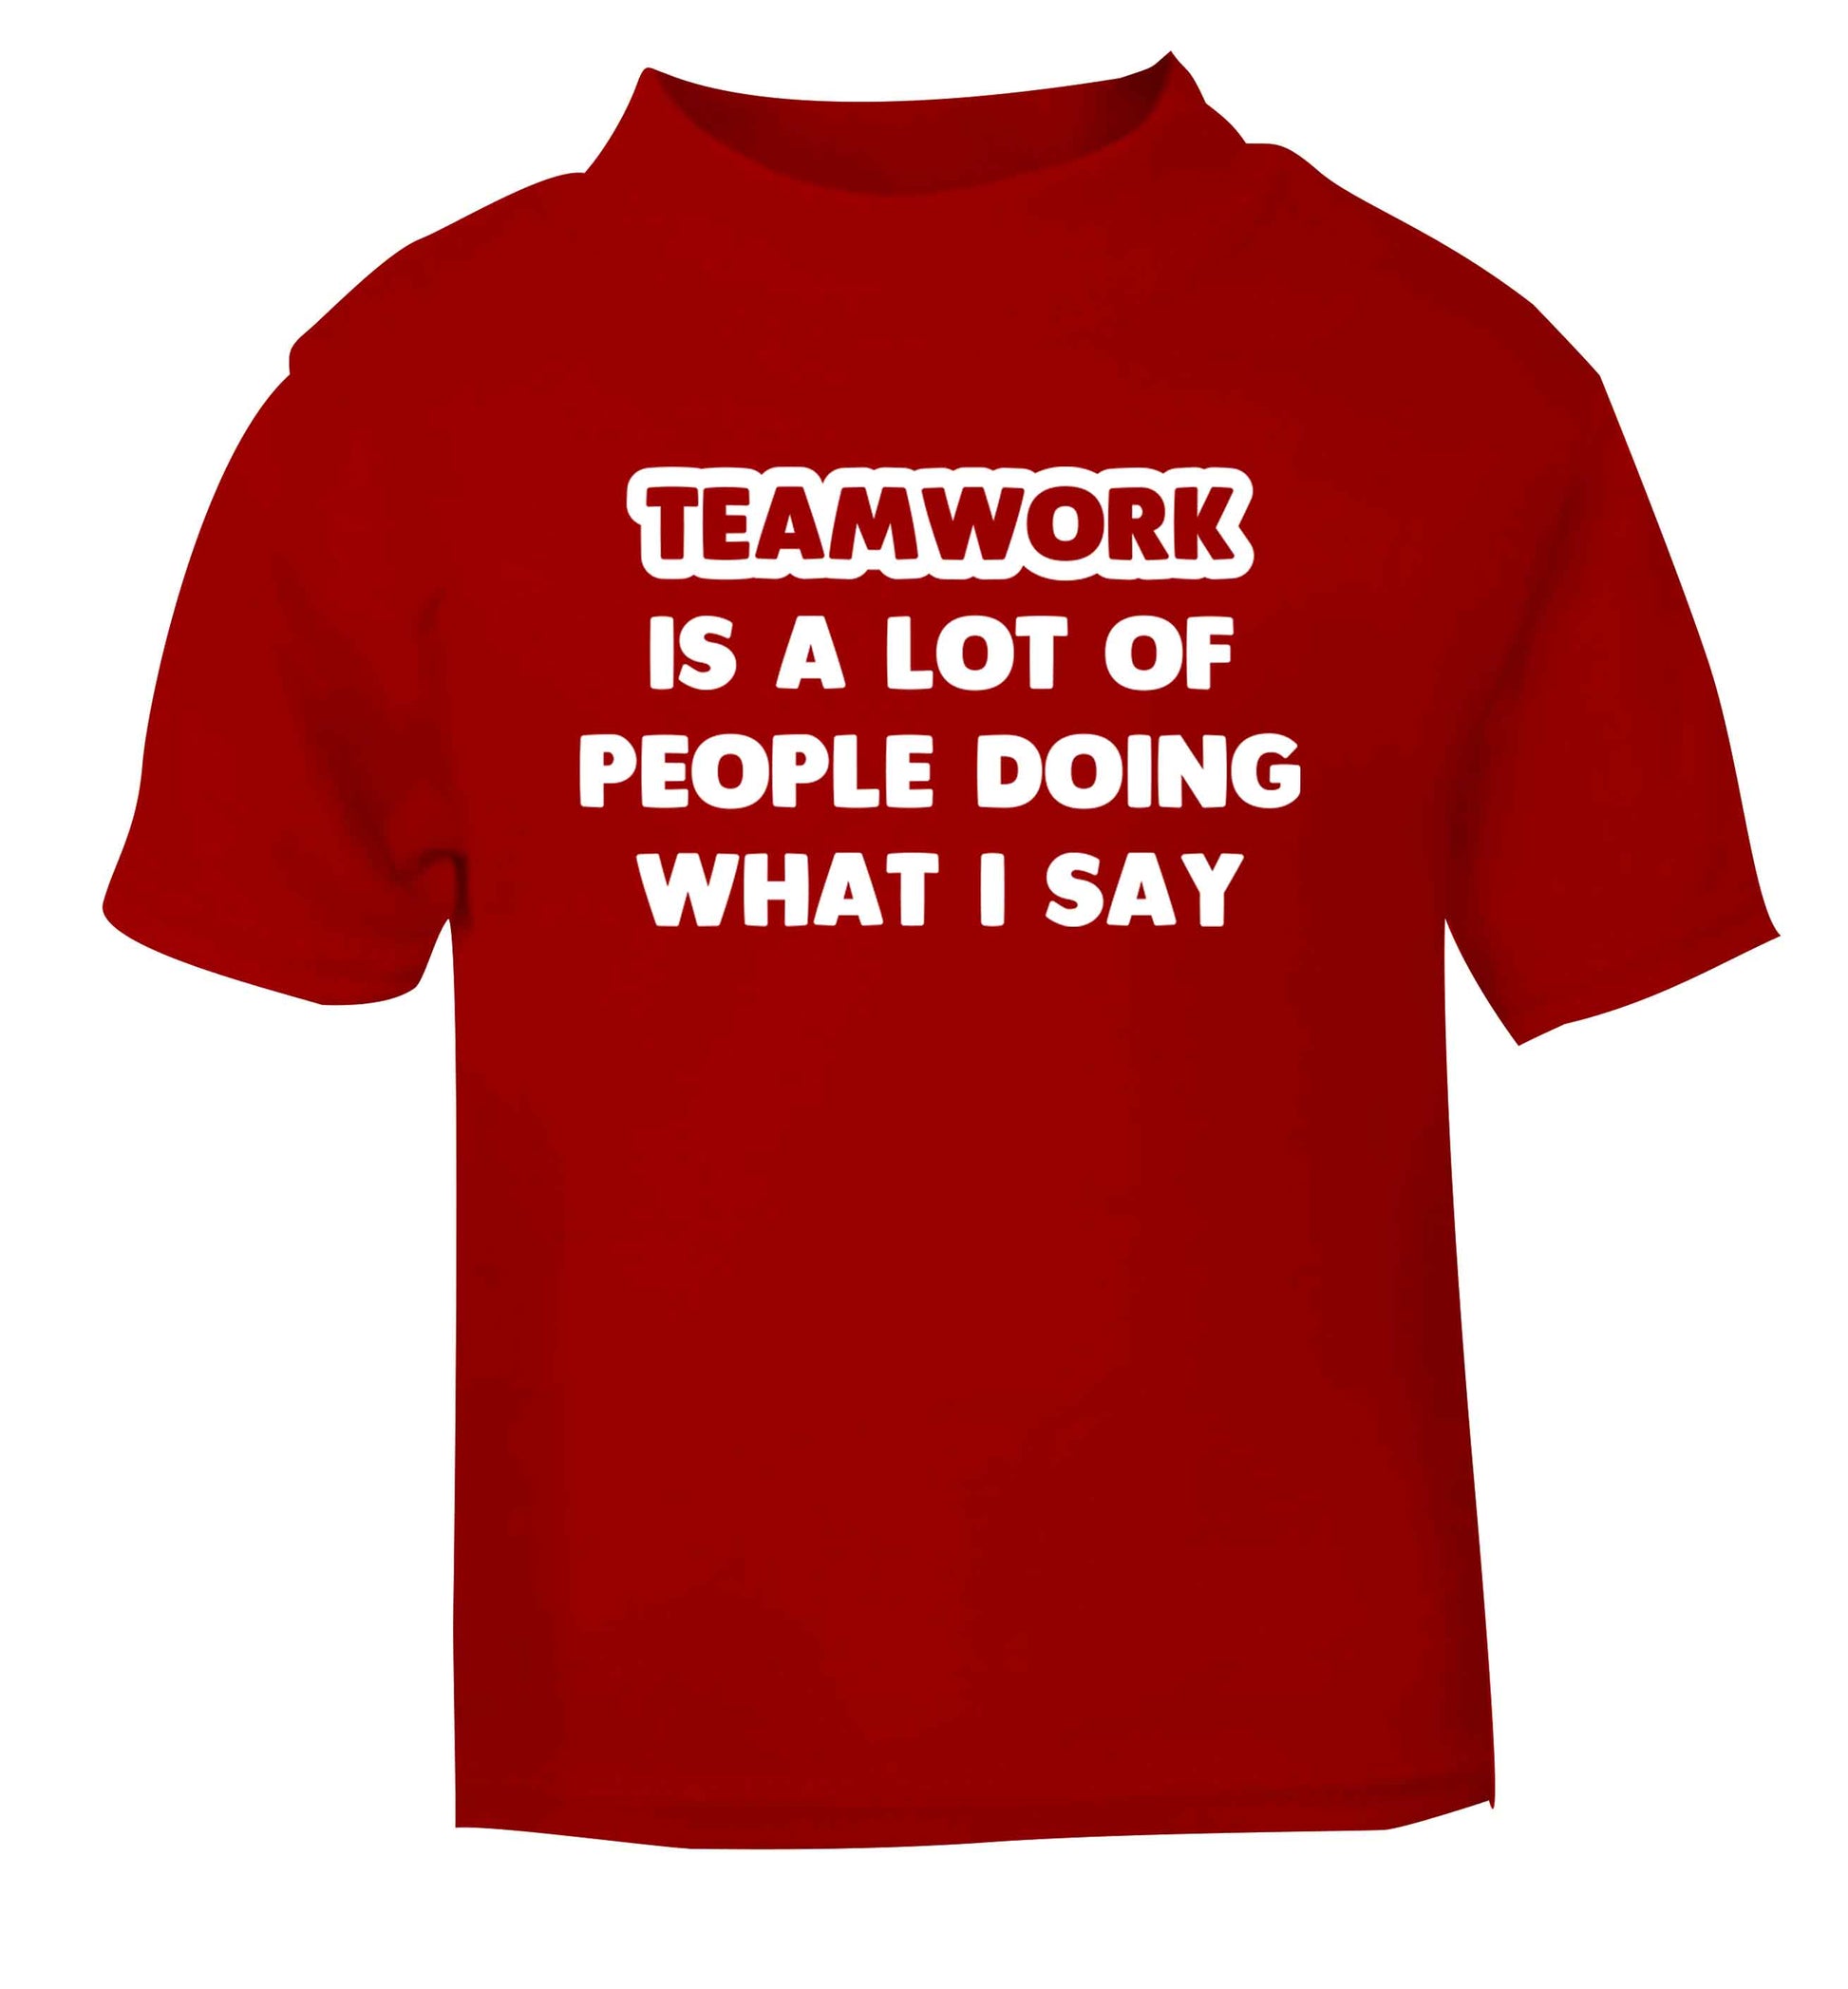 Teamwork is a lot of people doing what I say red Baby Toddler Tshirt 2 Years